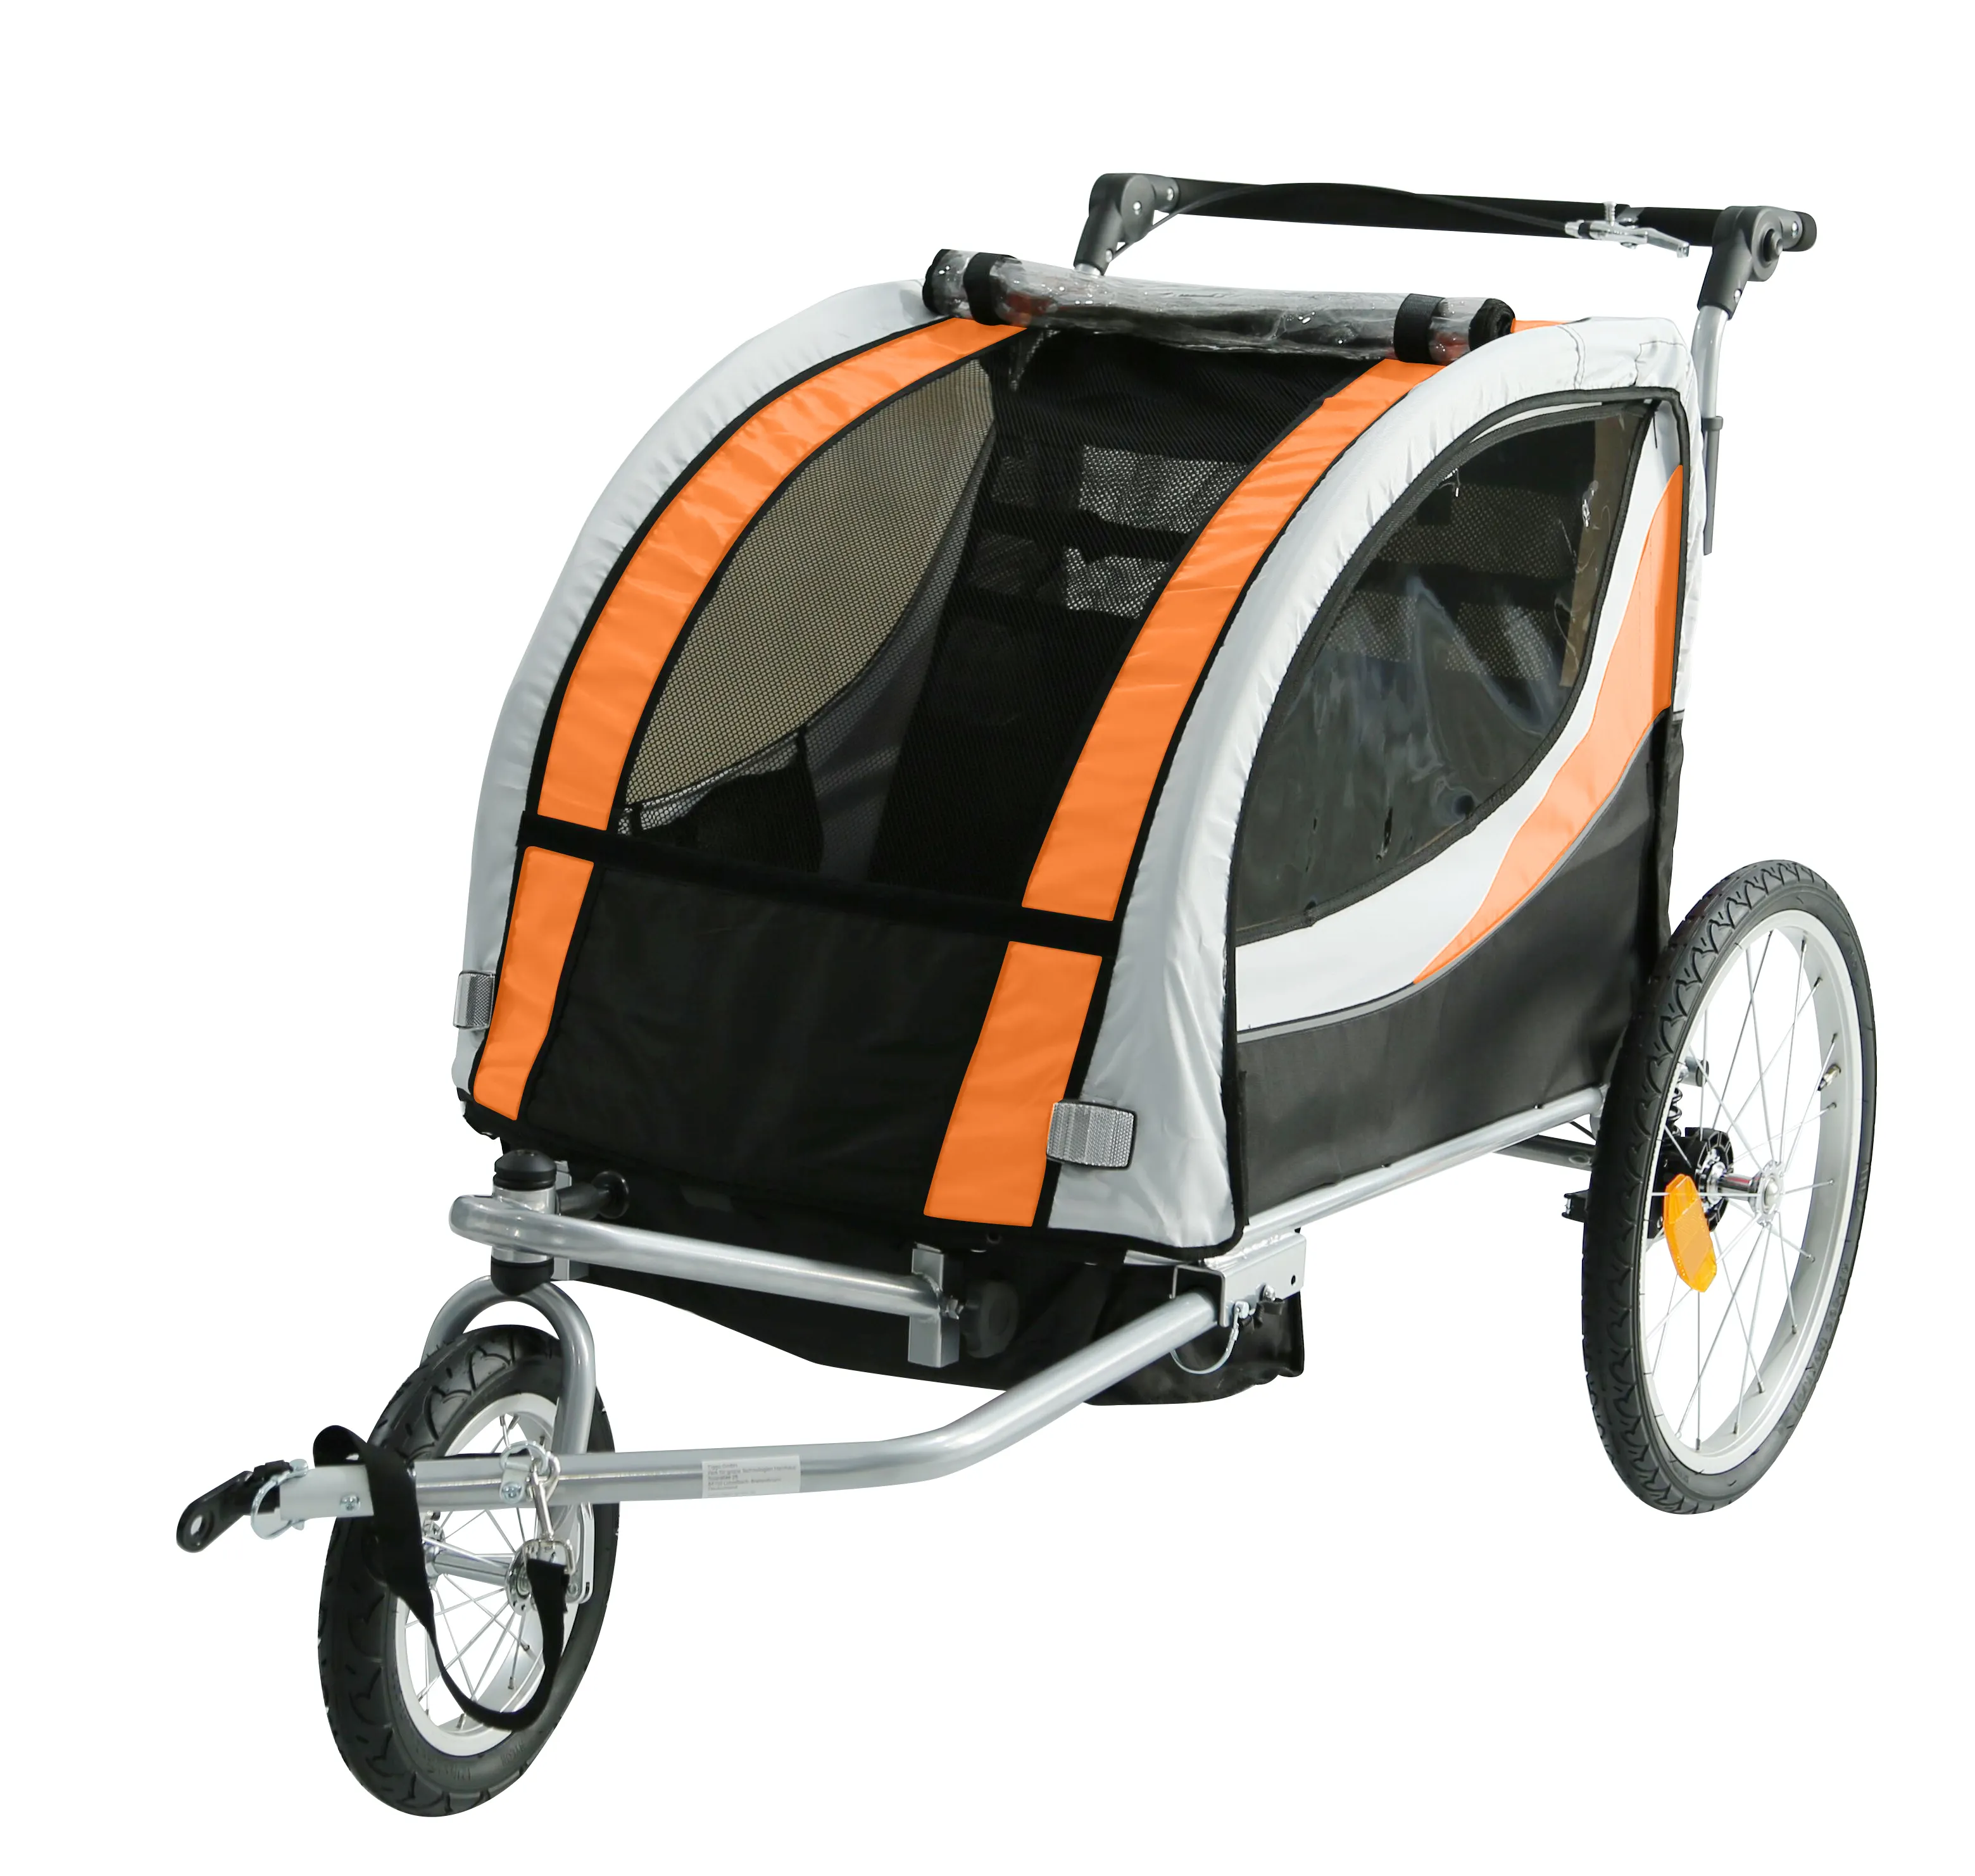 2021 baby bicycle trailer steel frame with high quality bicycle stroller, Chinese factory sell baby jogger bike trailer